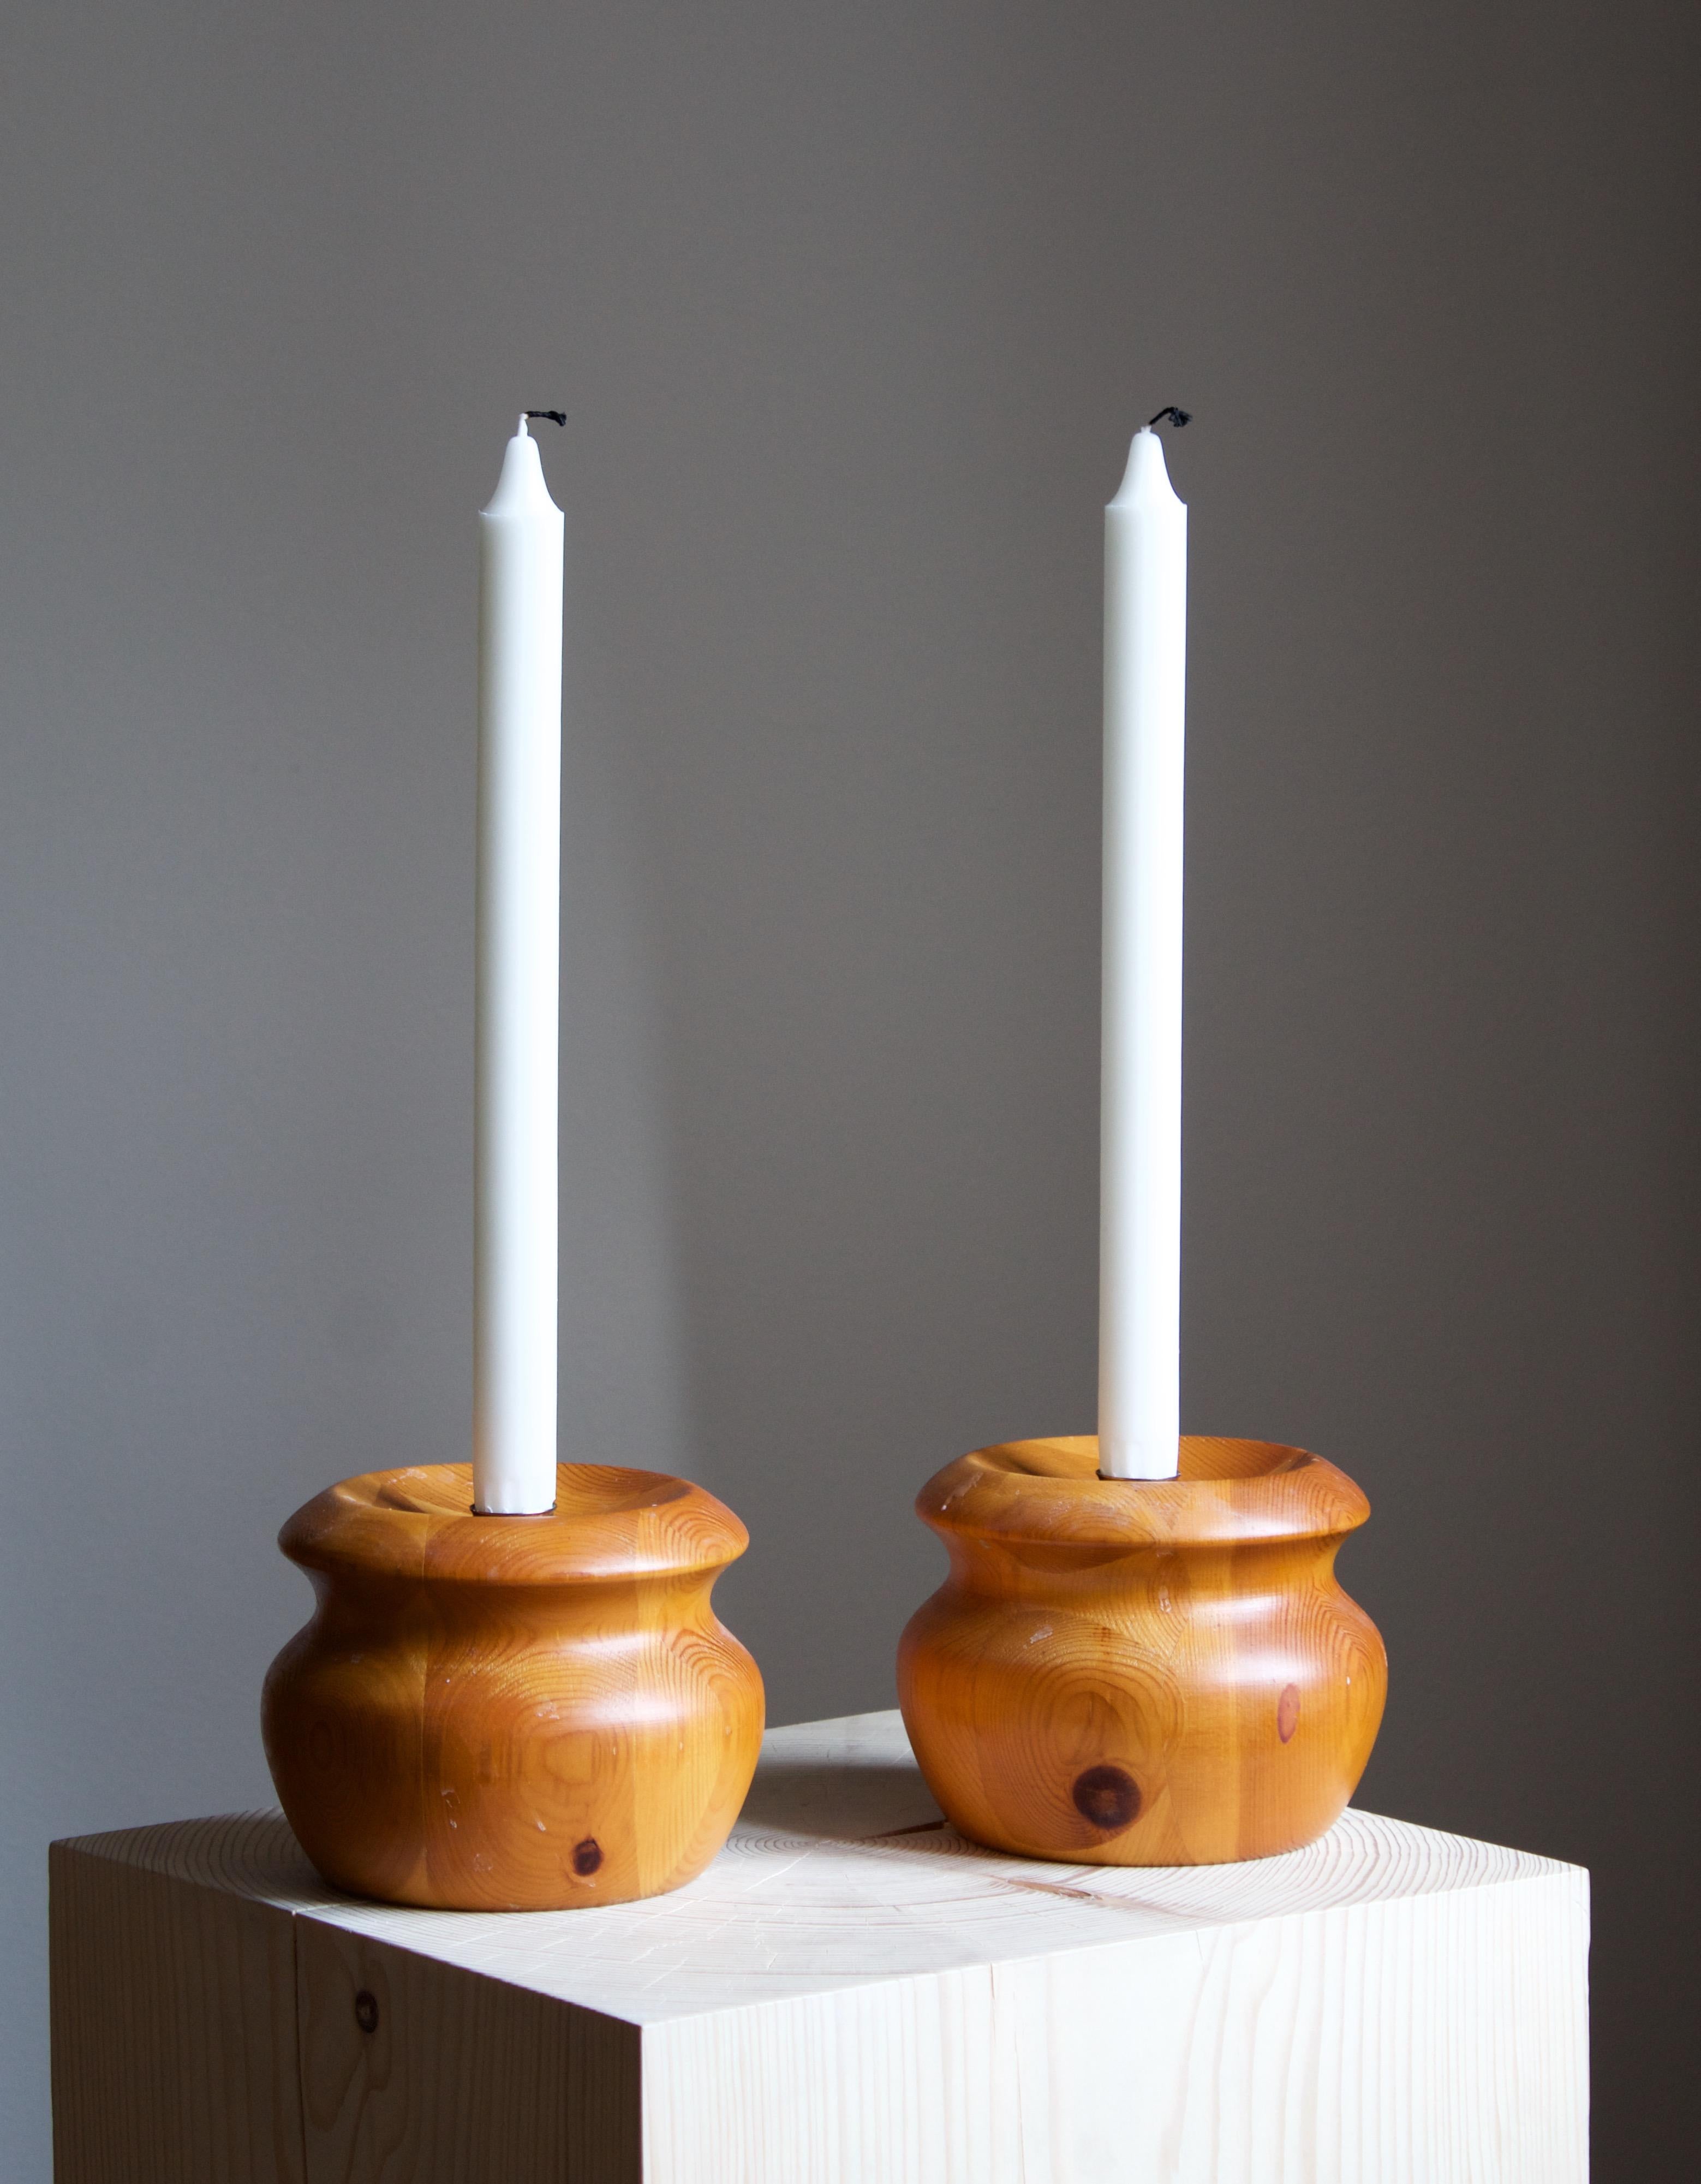 A set of Swedish candlesticks / candleholders. In turned solid pine. Brass nozzles.

